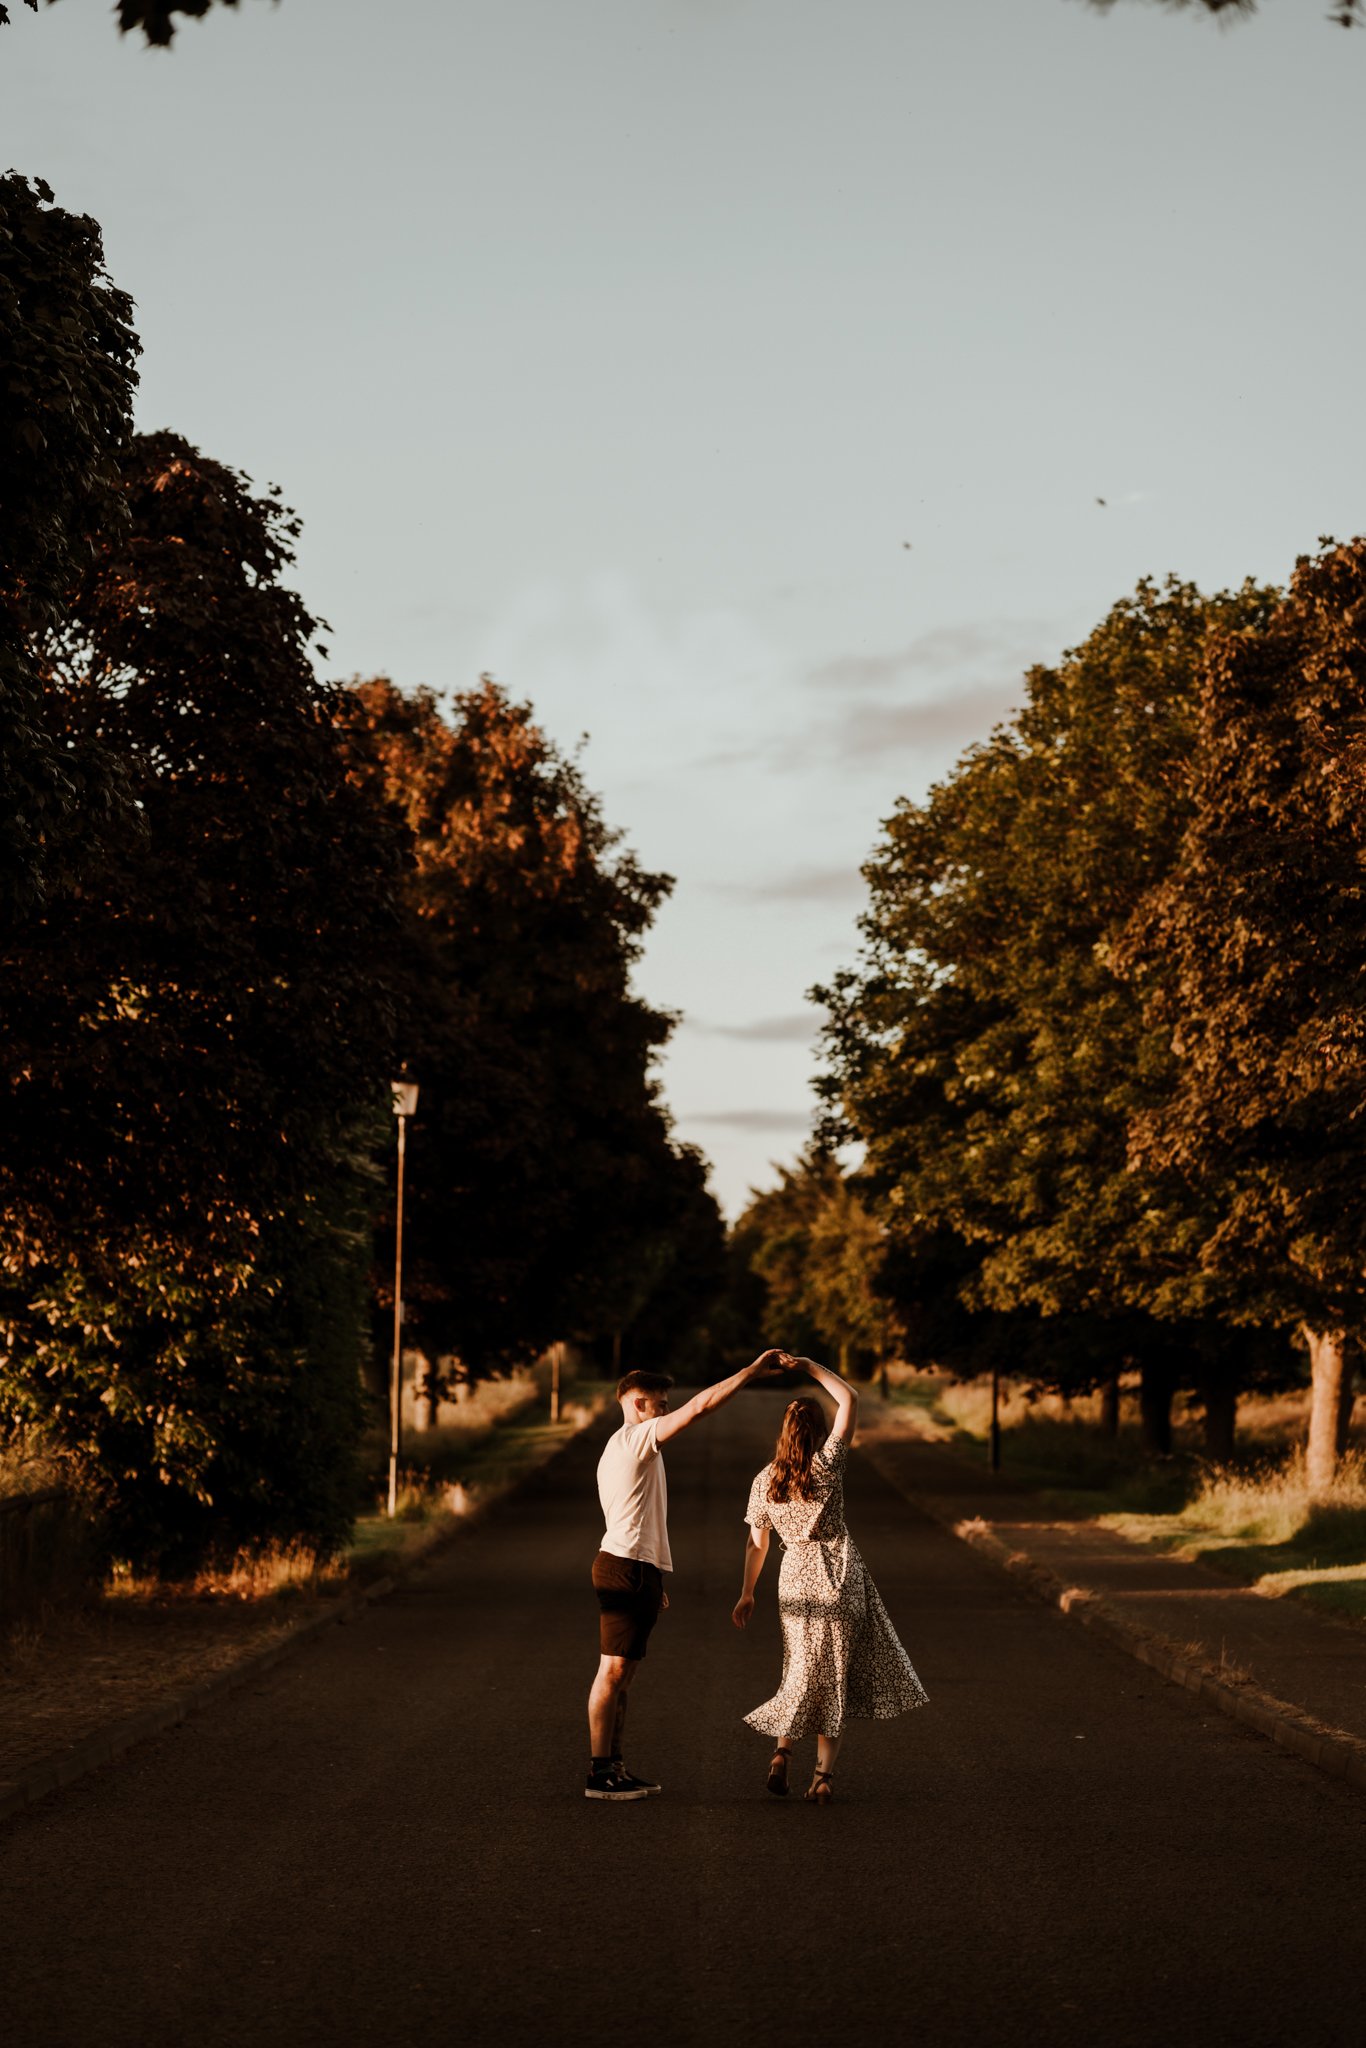 Angus Scotland Engagement and Wedding Photographer - Emily and Gabriel - Adventure Couple Session96.jpg